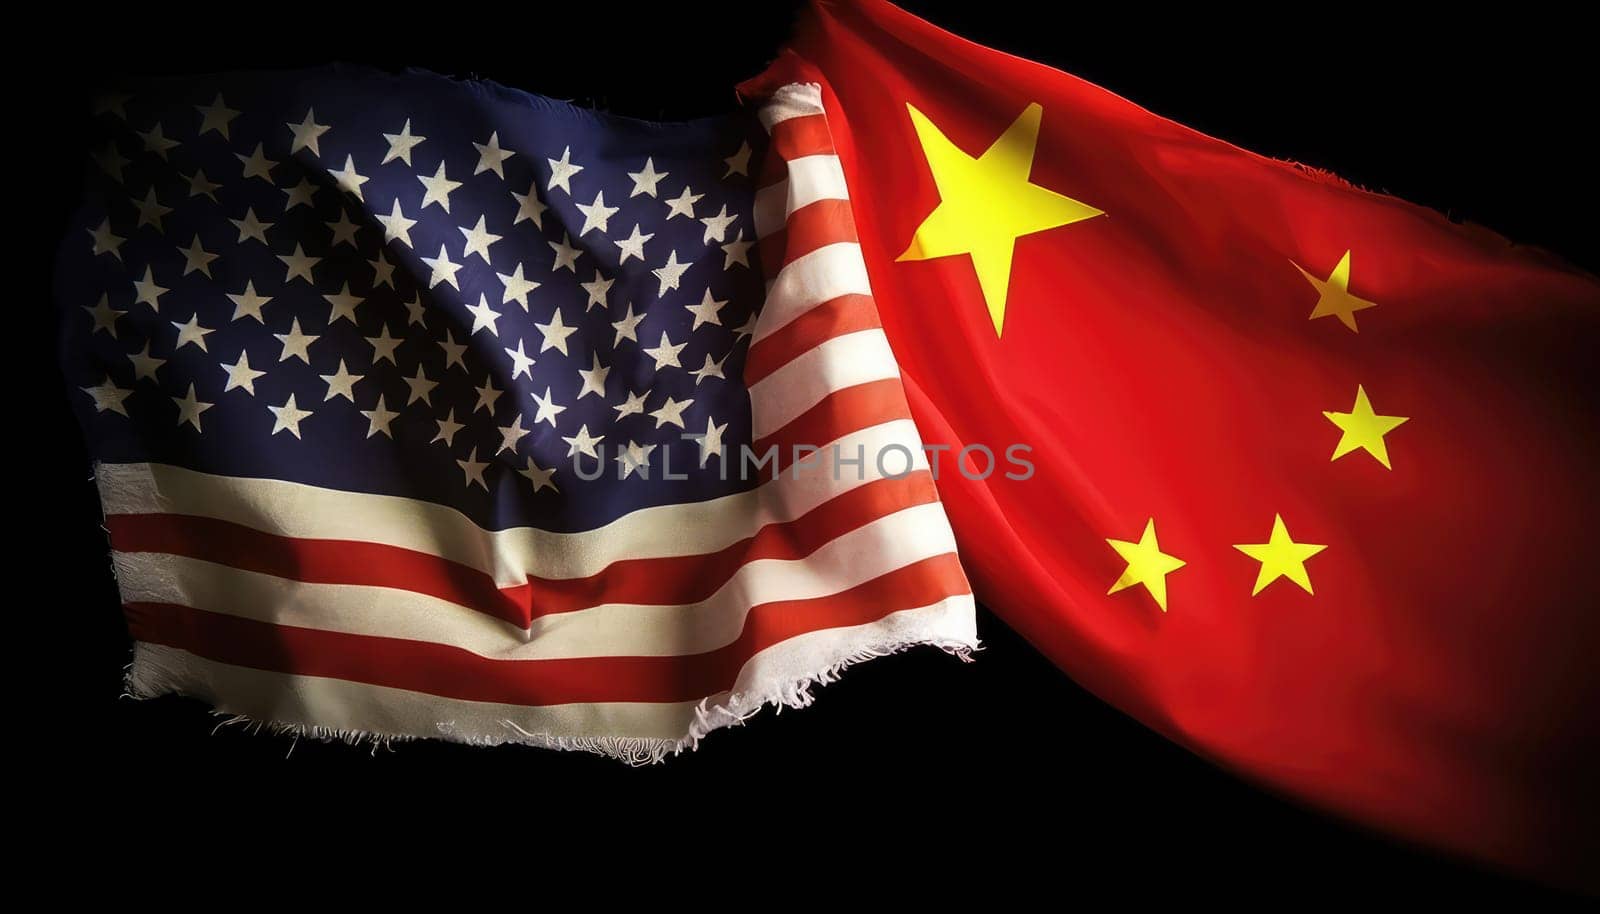 Dynamic Illustration of Torn Flags of China and USA, Symbolizing Diplomatic Tension by Dvorak